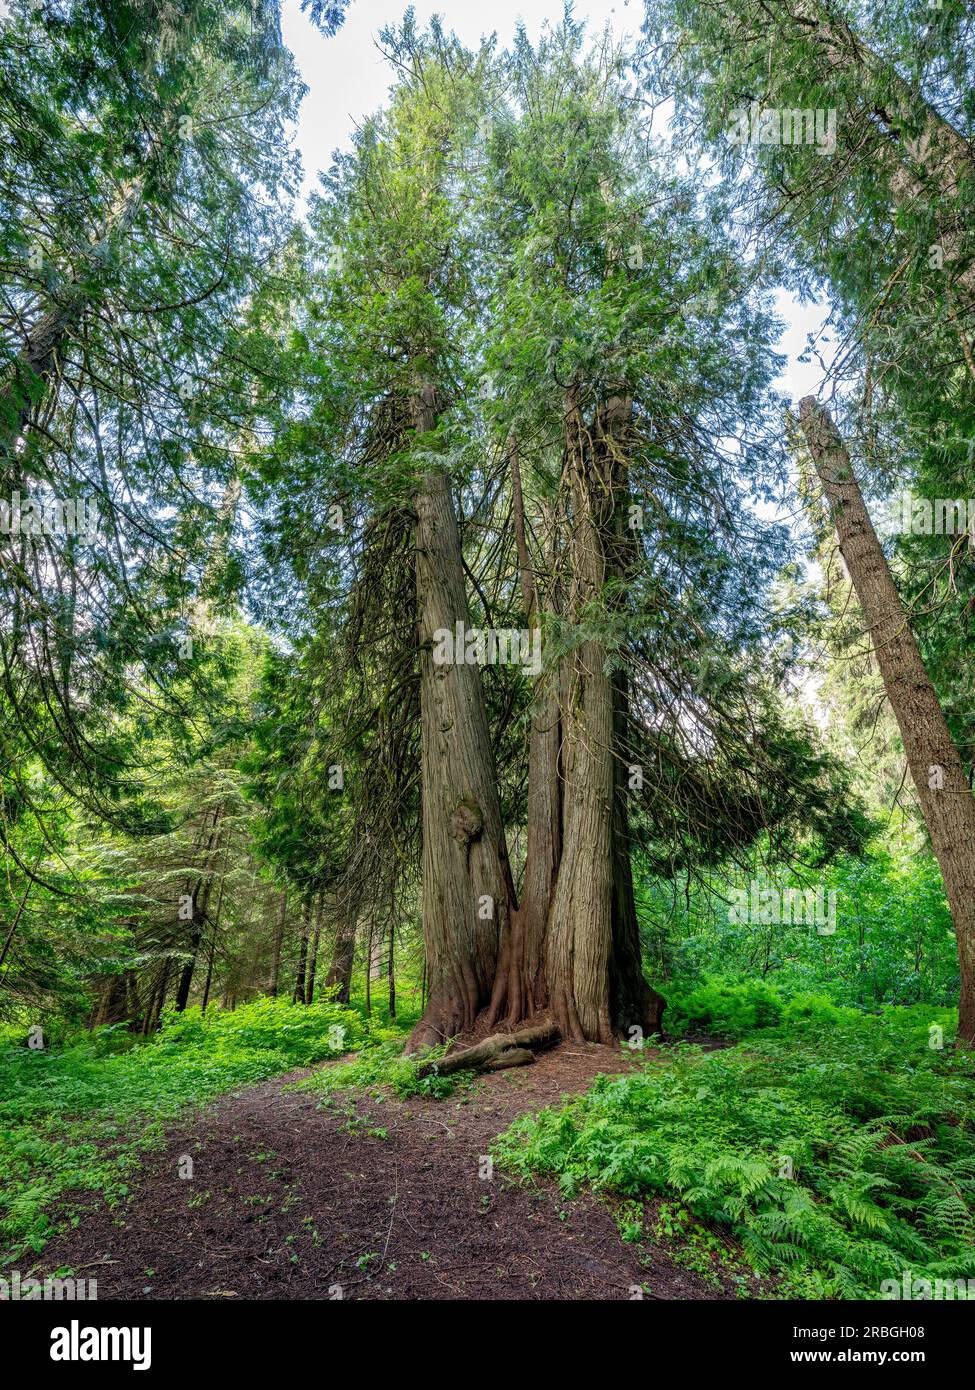 Tall cedar trees in a special forest where they live Stock Photo